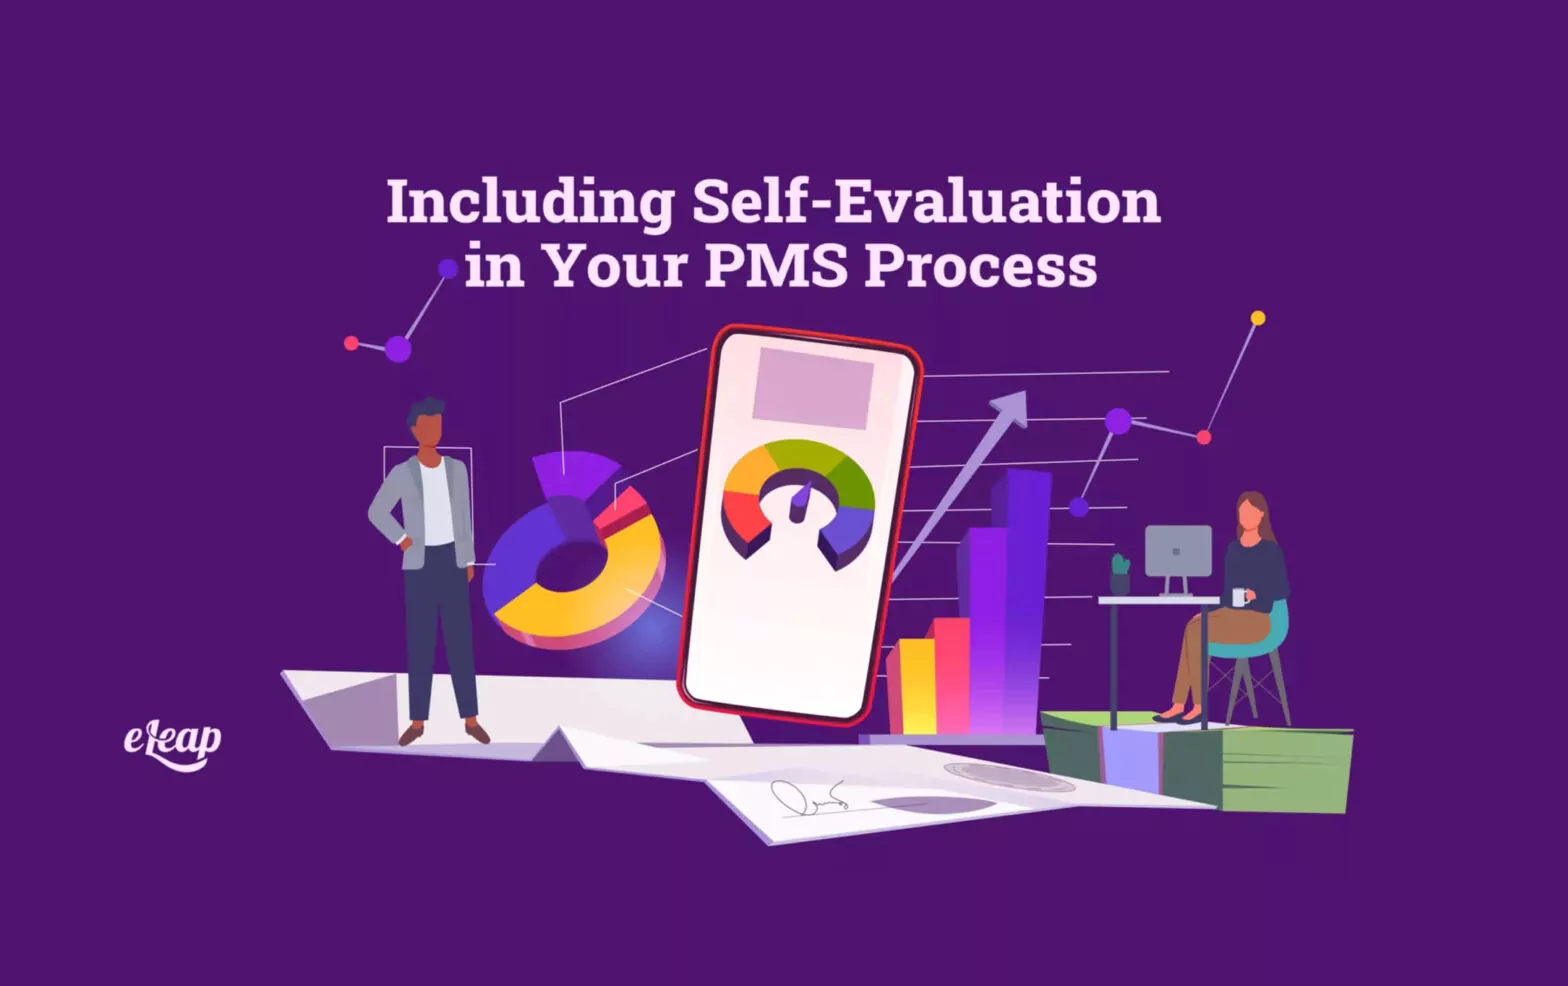 Including Self-Evaluation in Your PMS Process